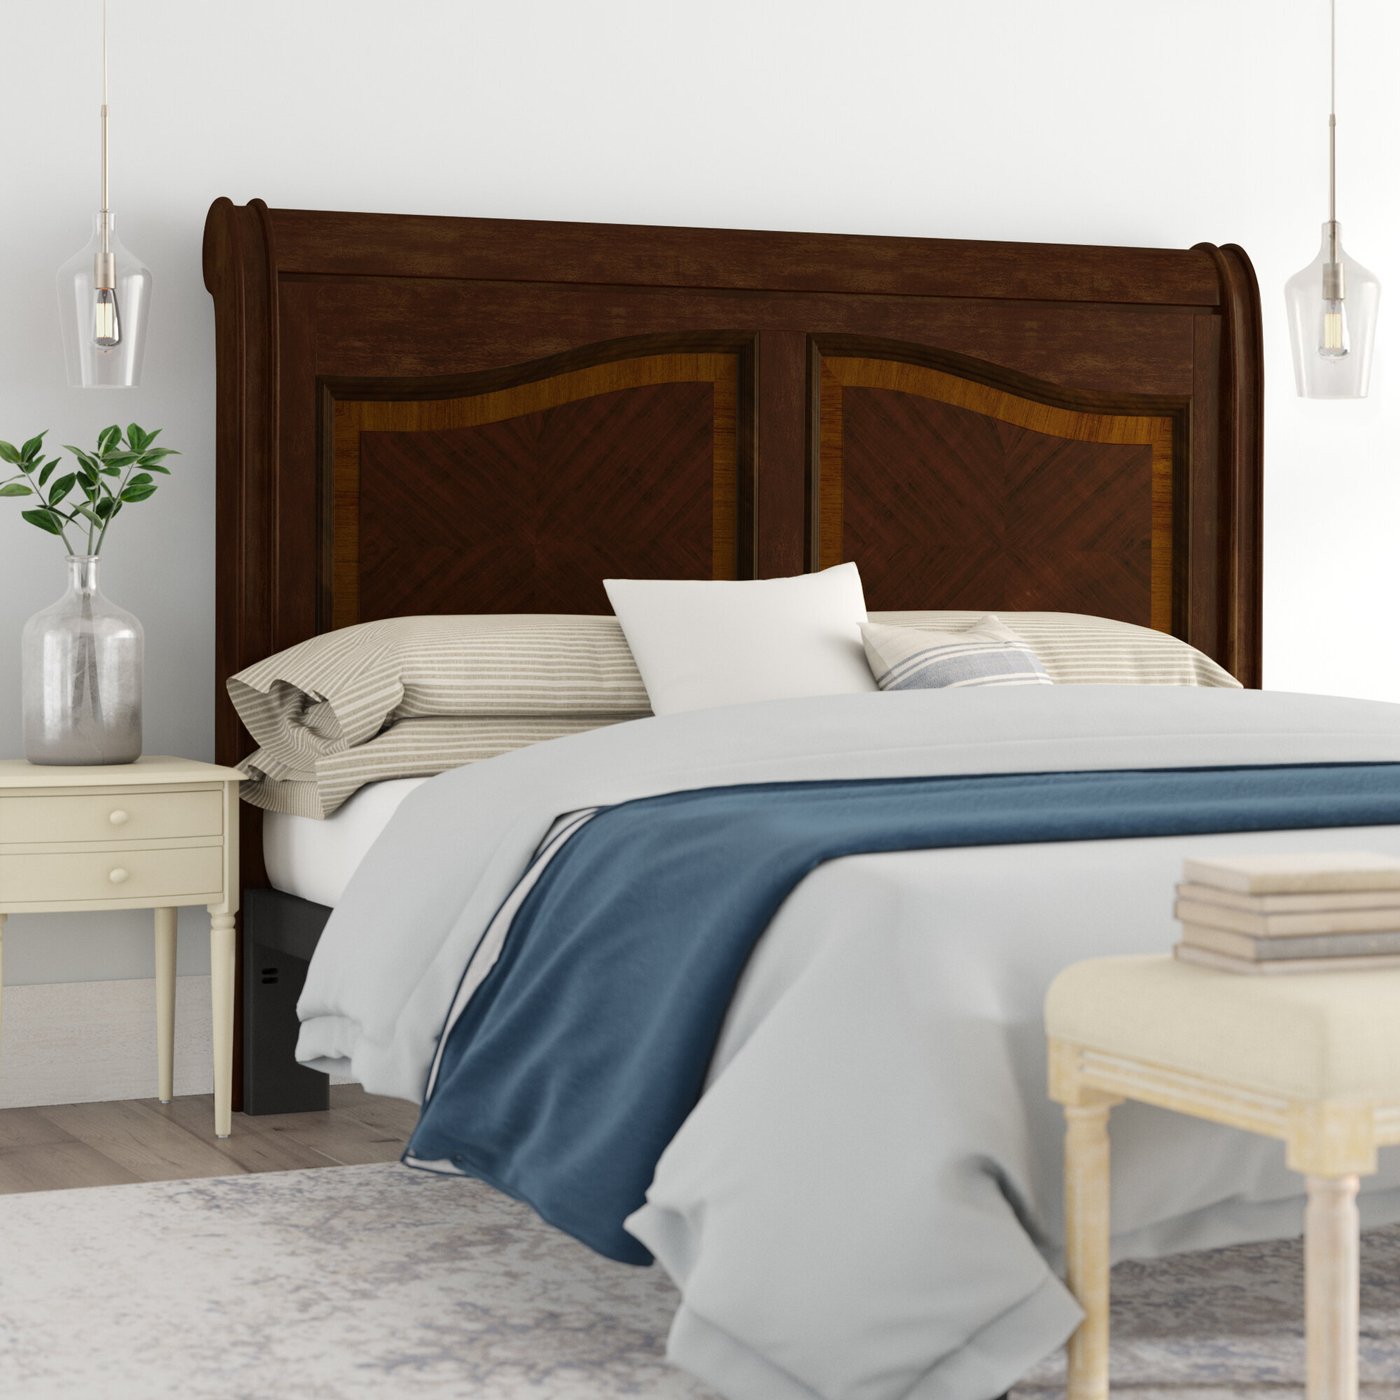 5 Expert Tips To Choose A Headboard - VisualHunt